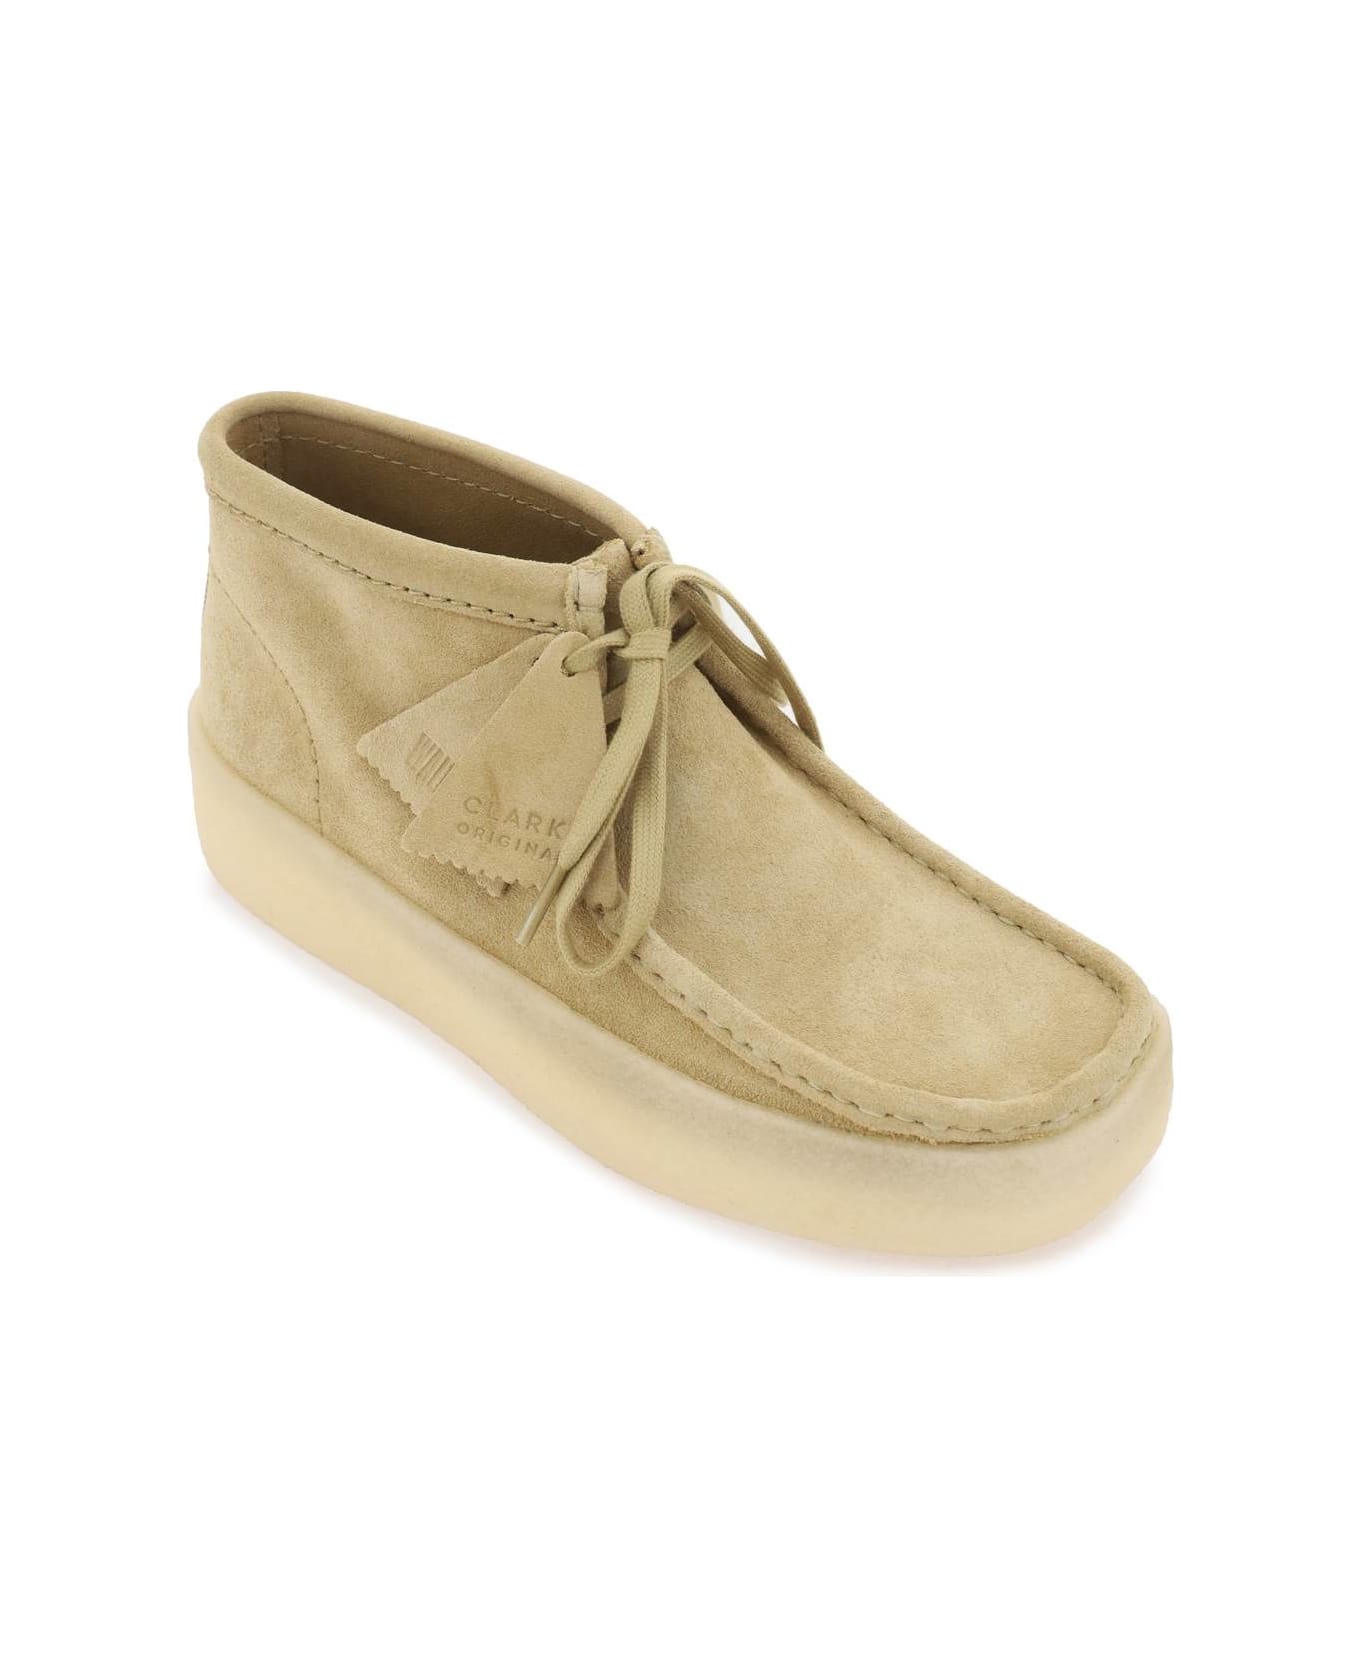 Clarks 'wallabee Cup Bt' Lace-up Shoes - Beige